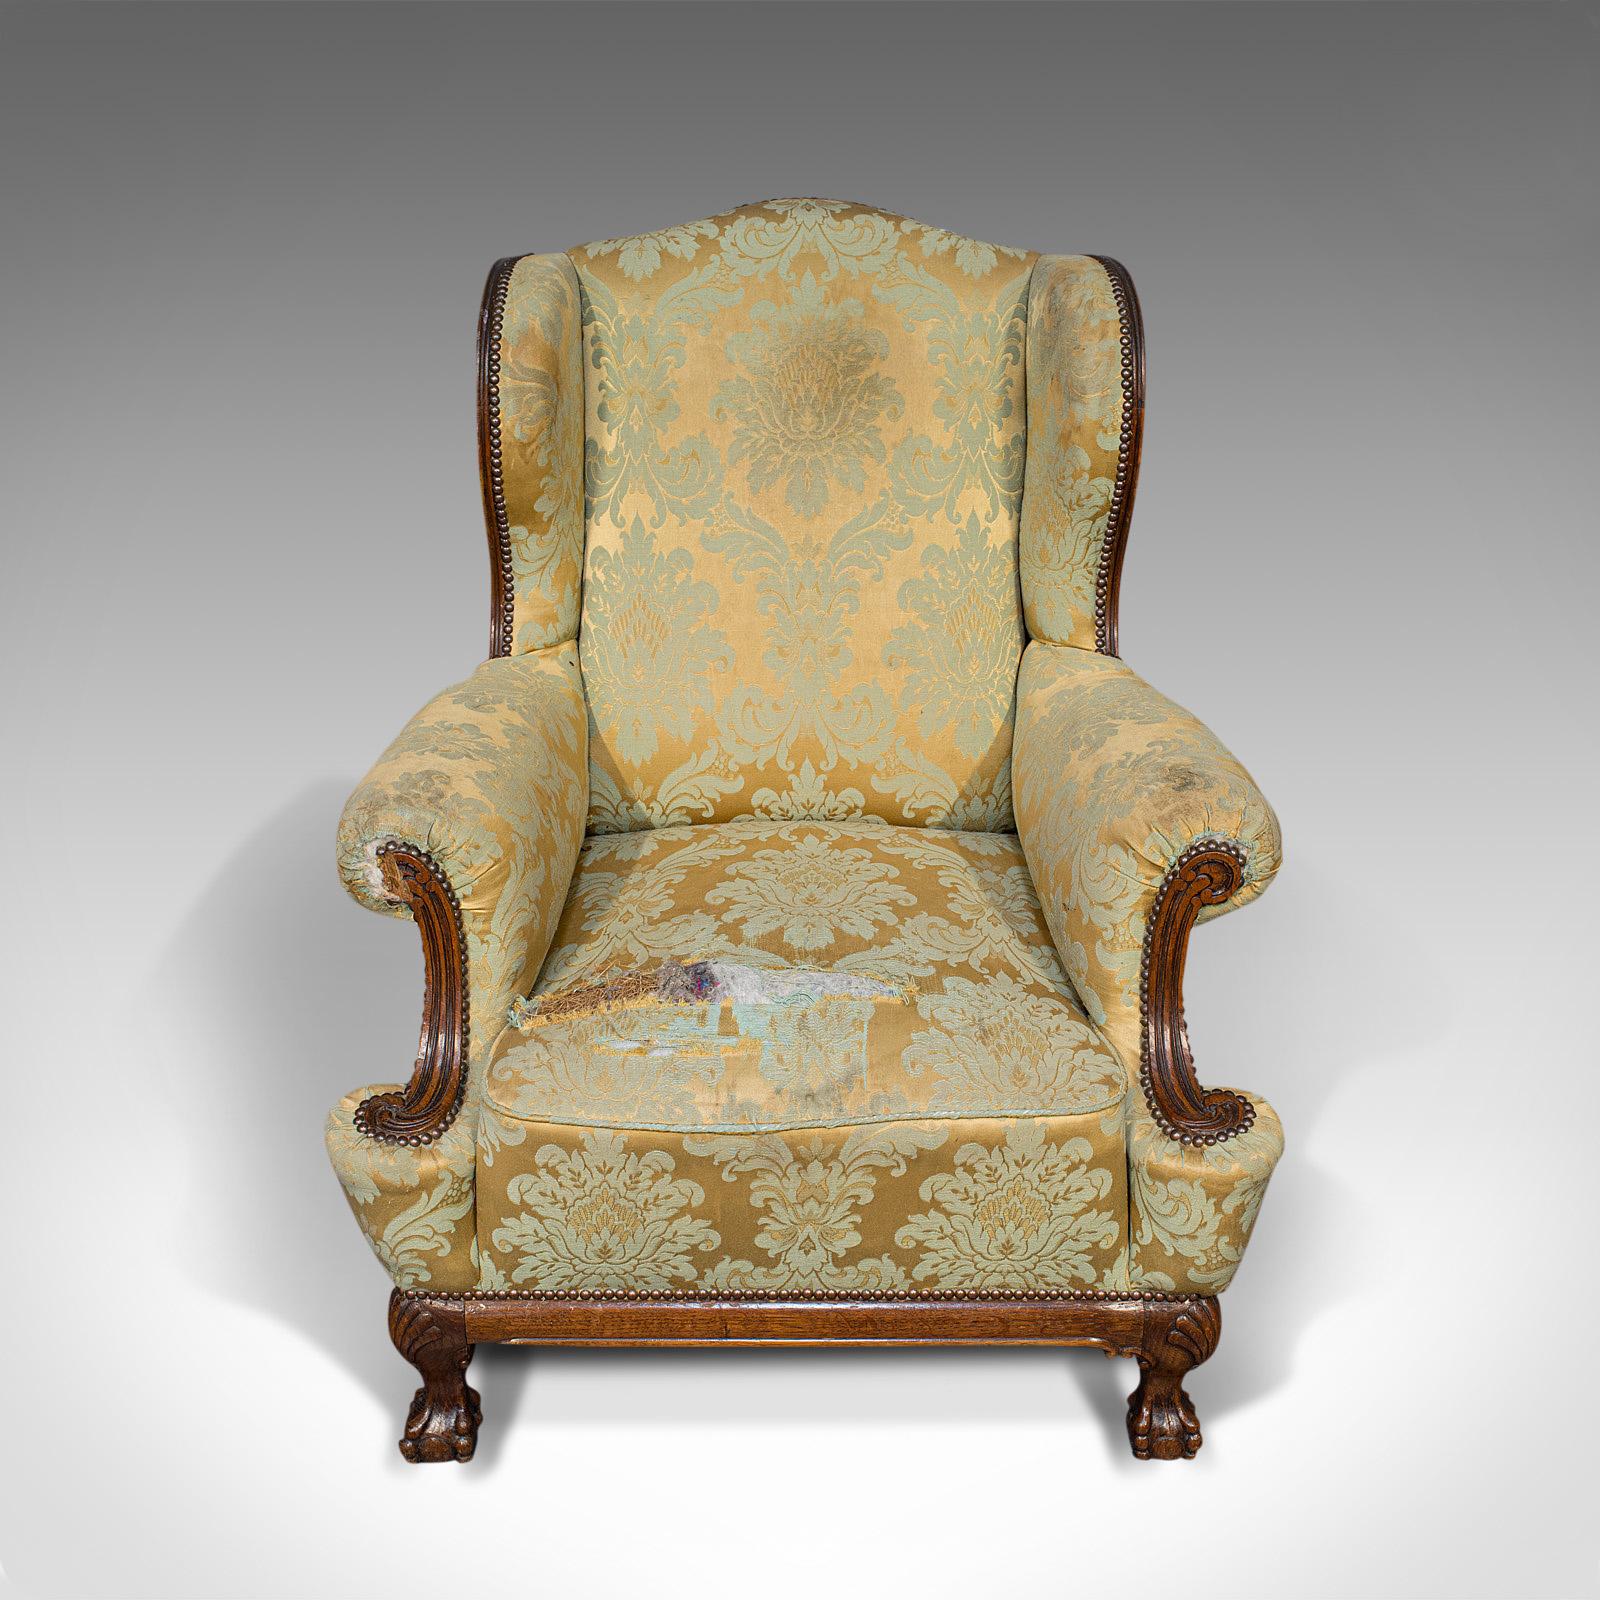 20th Century Antique Wing-Back Armchair, English, Fireside, Lounge, Seat, Edwardian, 1910